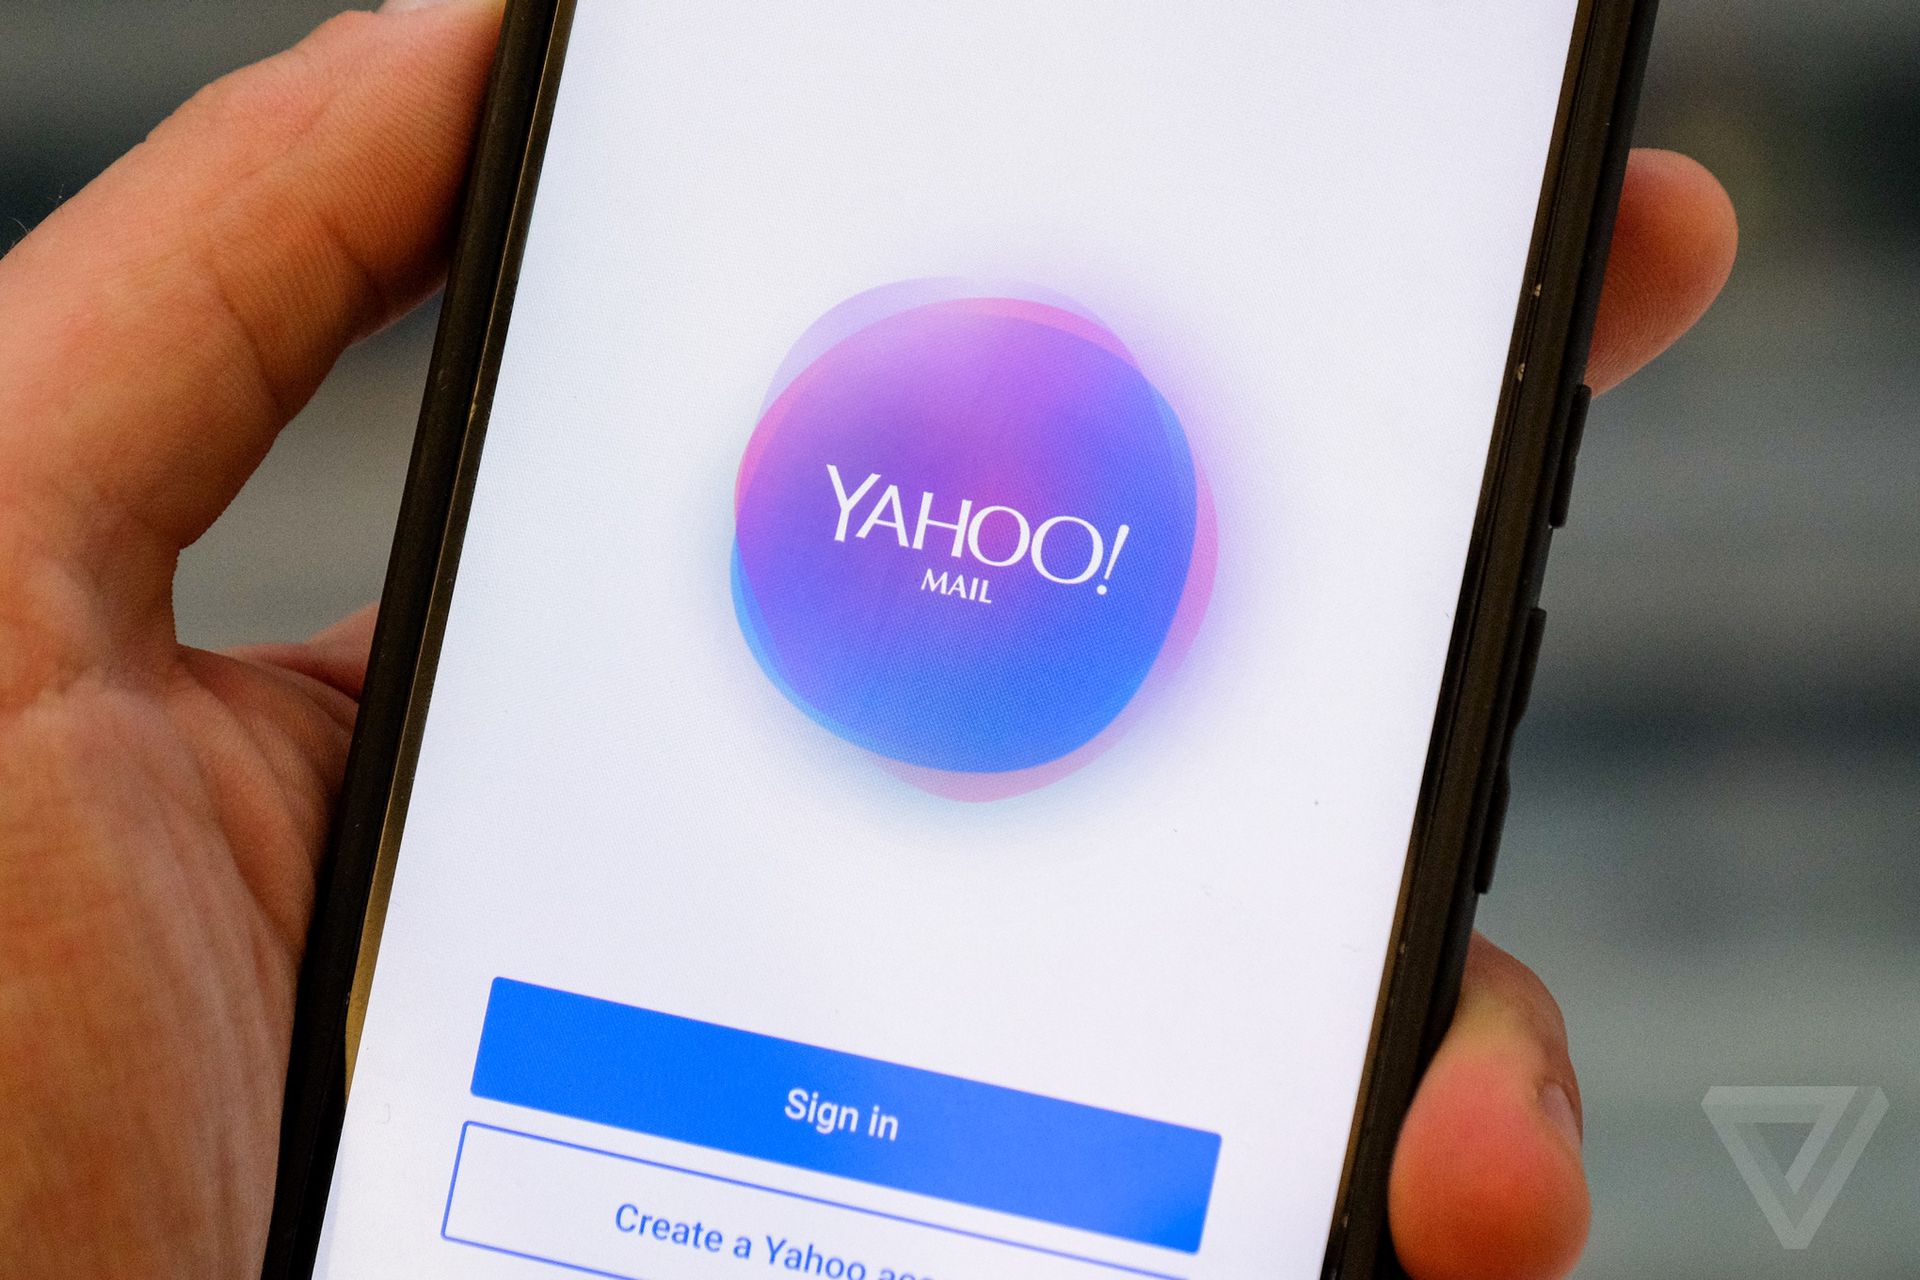 Yahoo Says All 3 Billion User Accounts Were Impacted By 2013 Security Breach The Verge 1654